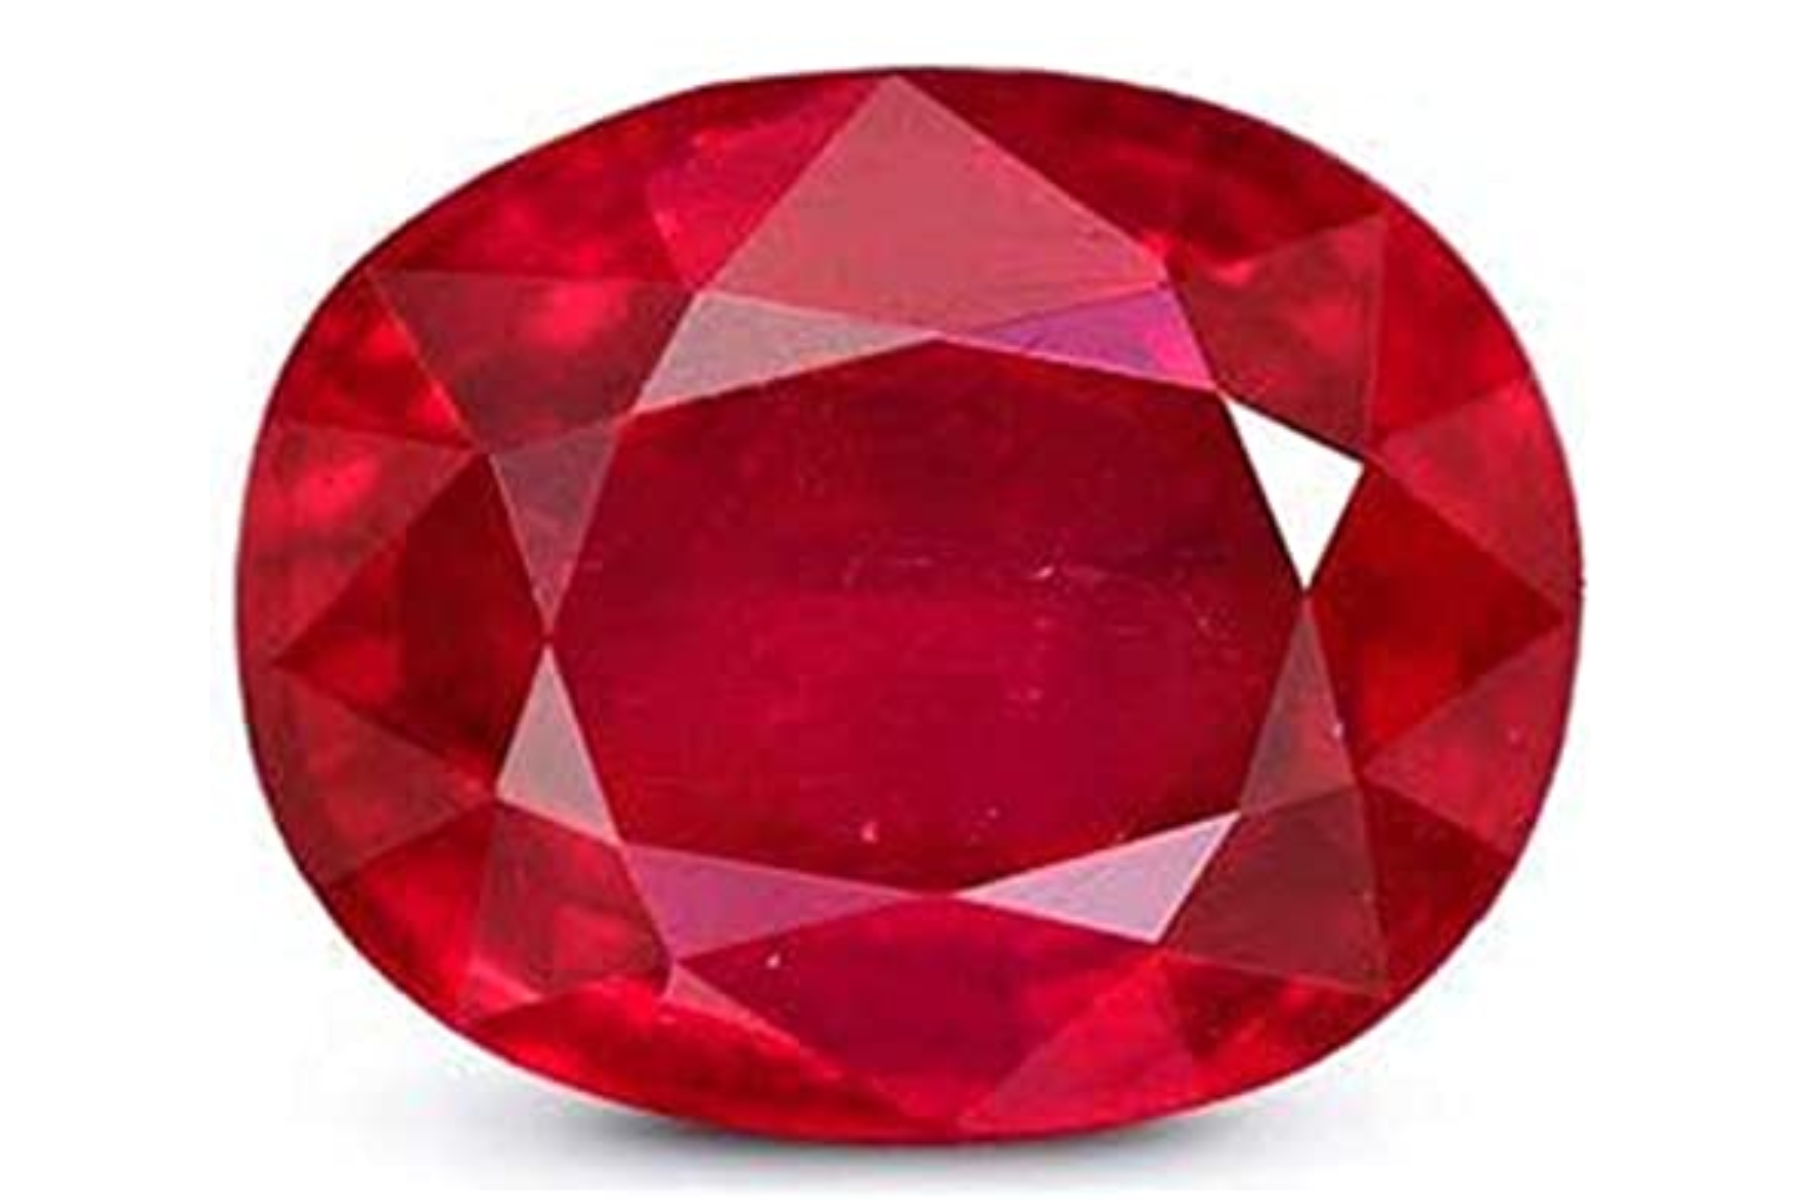 Oblong red ruby stone